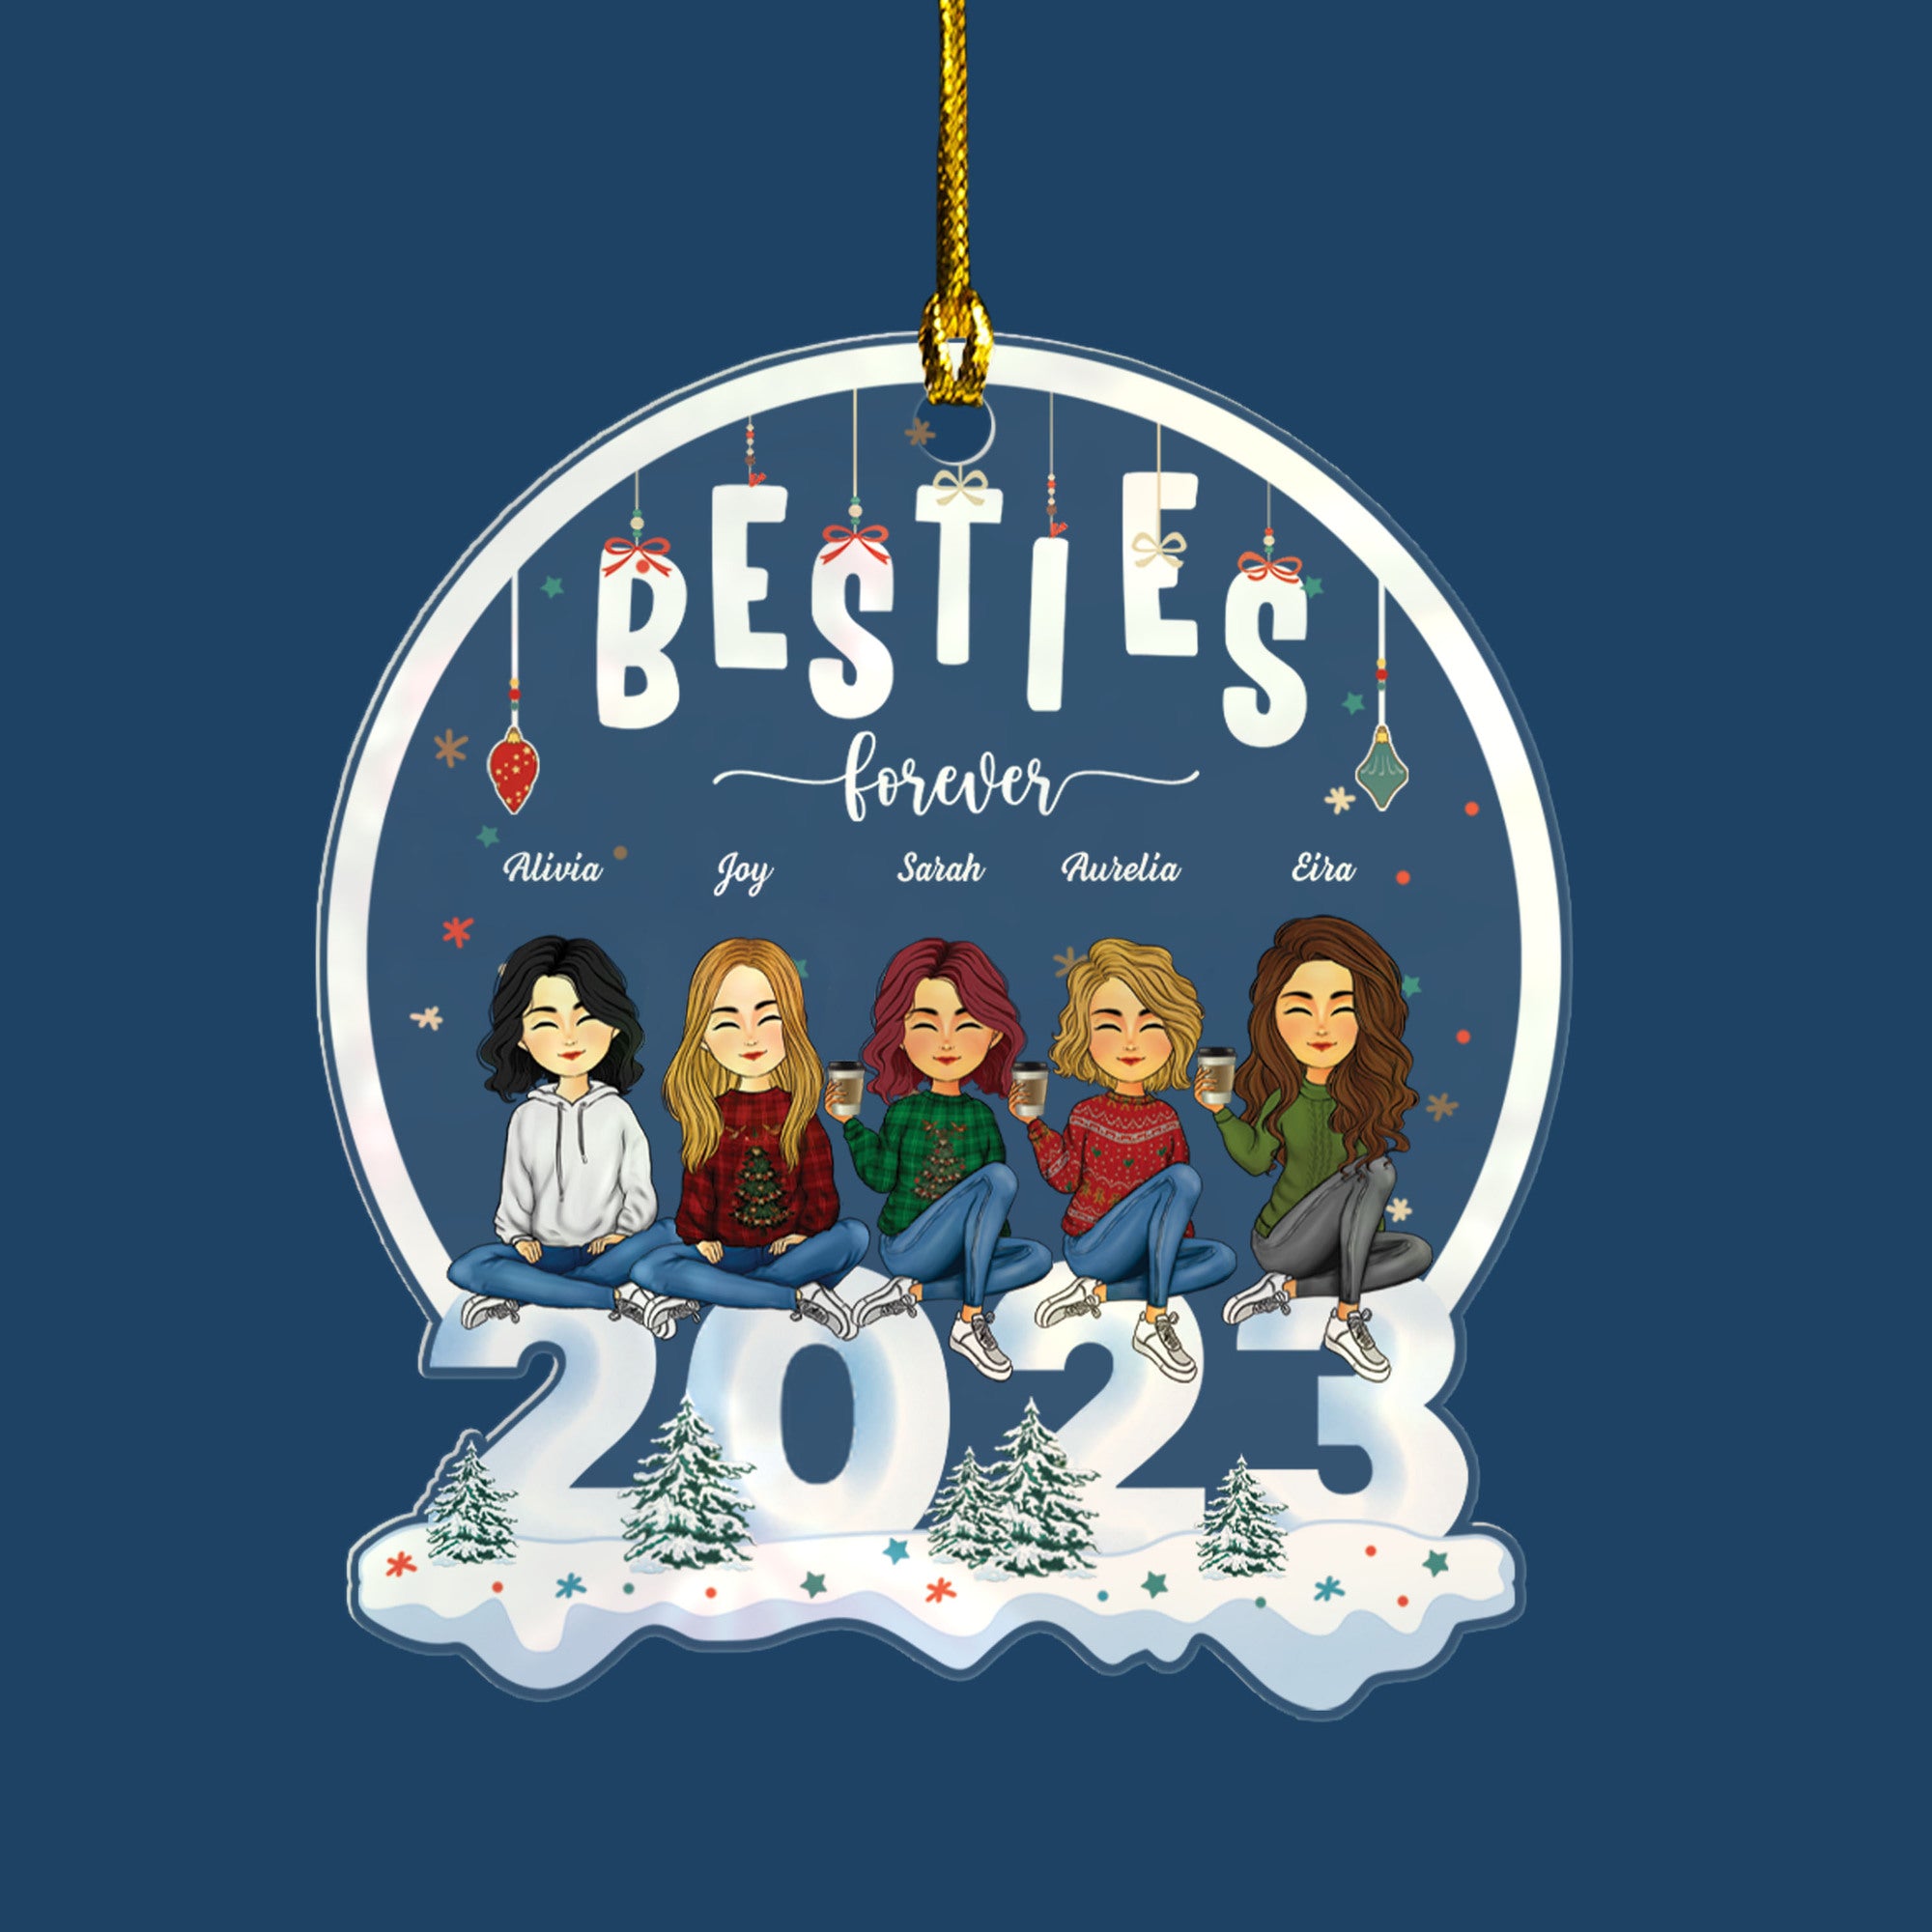 Besties Forever - Christmas Gift - Gift For BFF, Best Friends - Personalized Custom Shape Acrylic Ornament